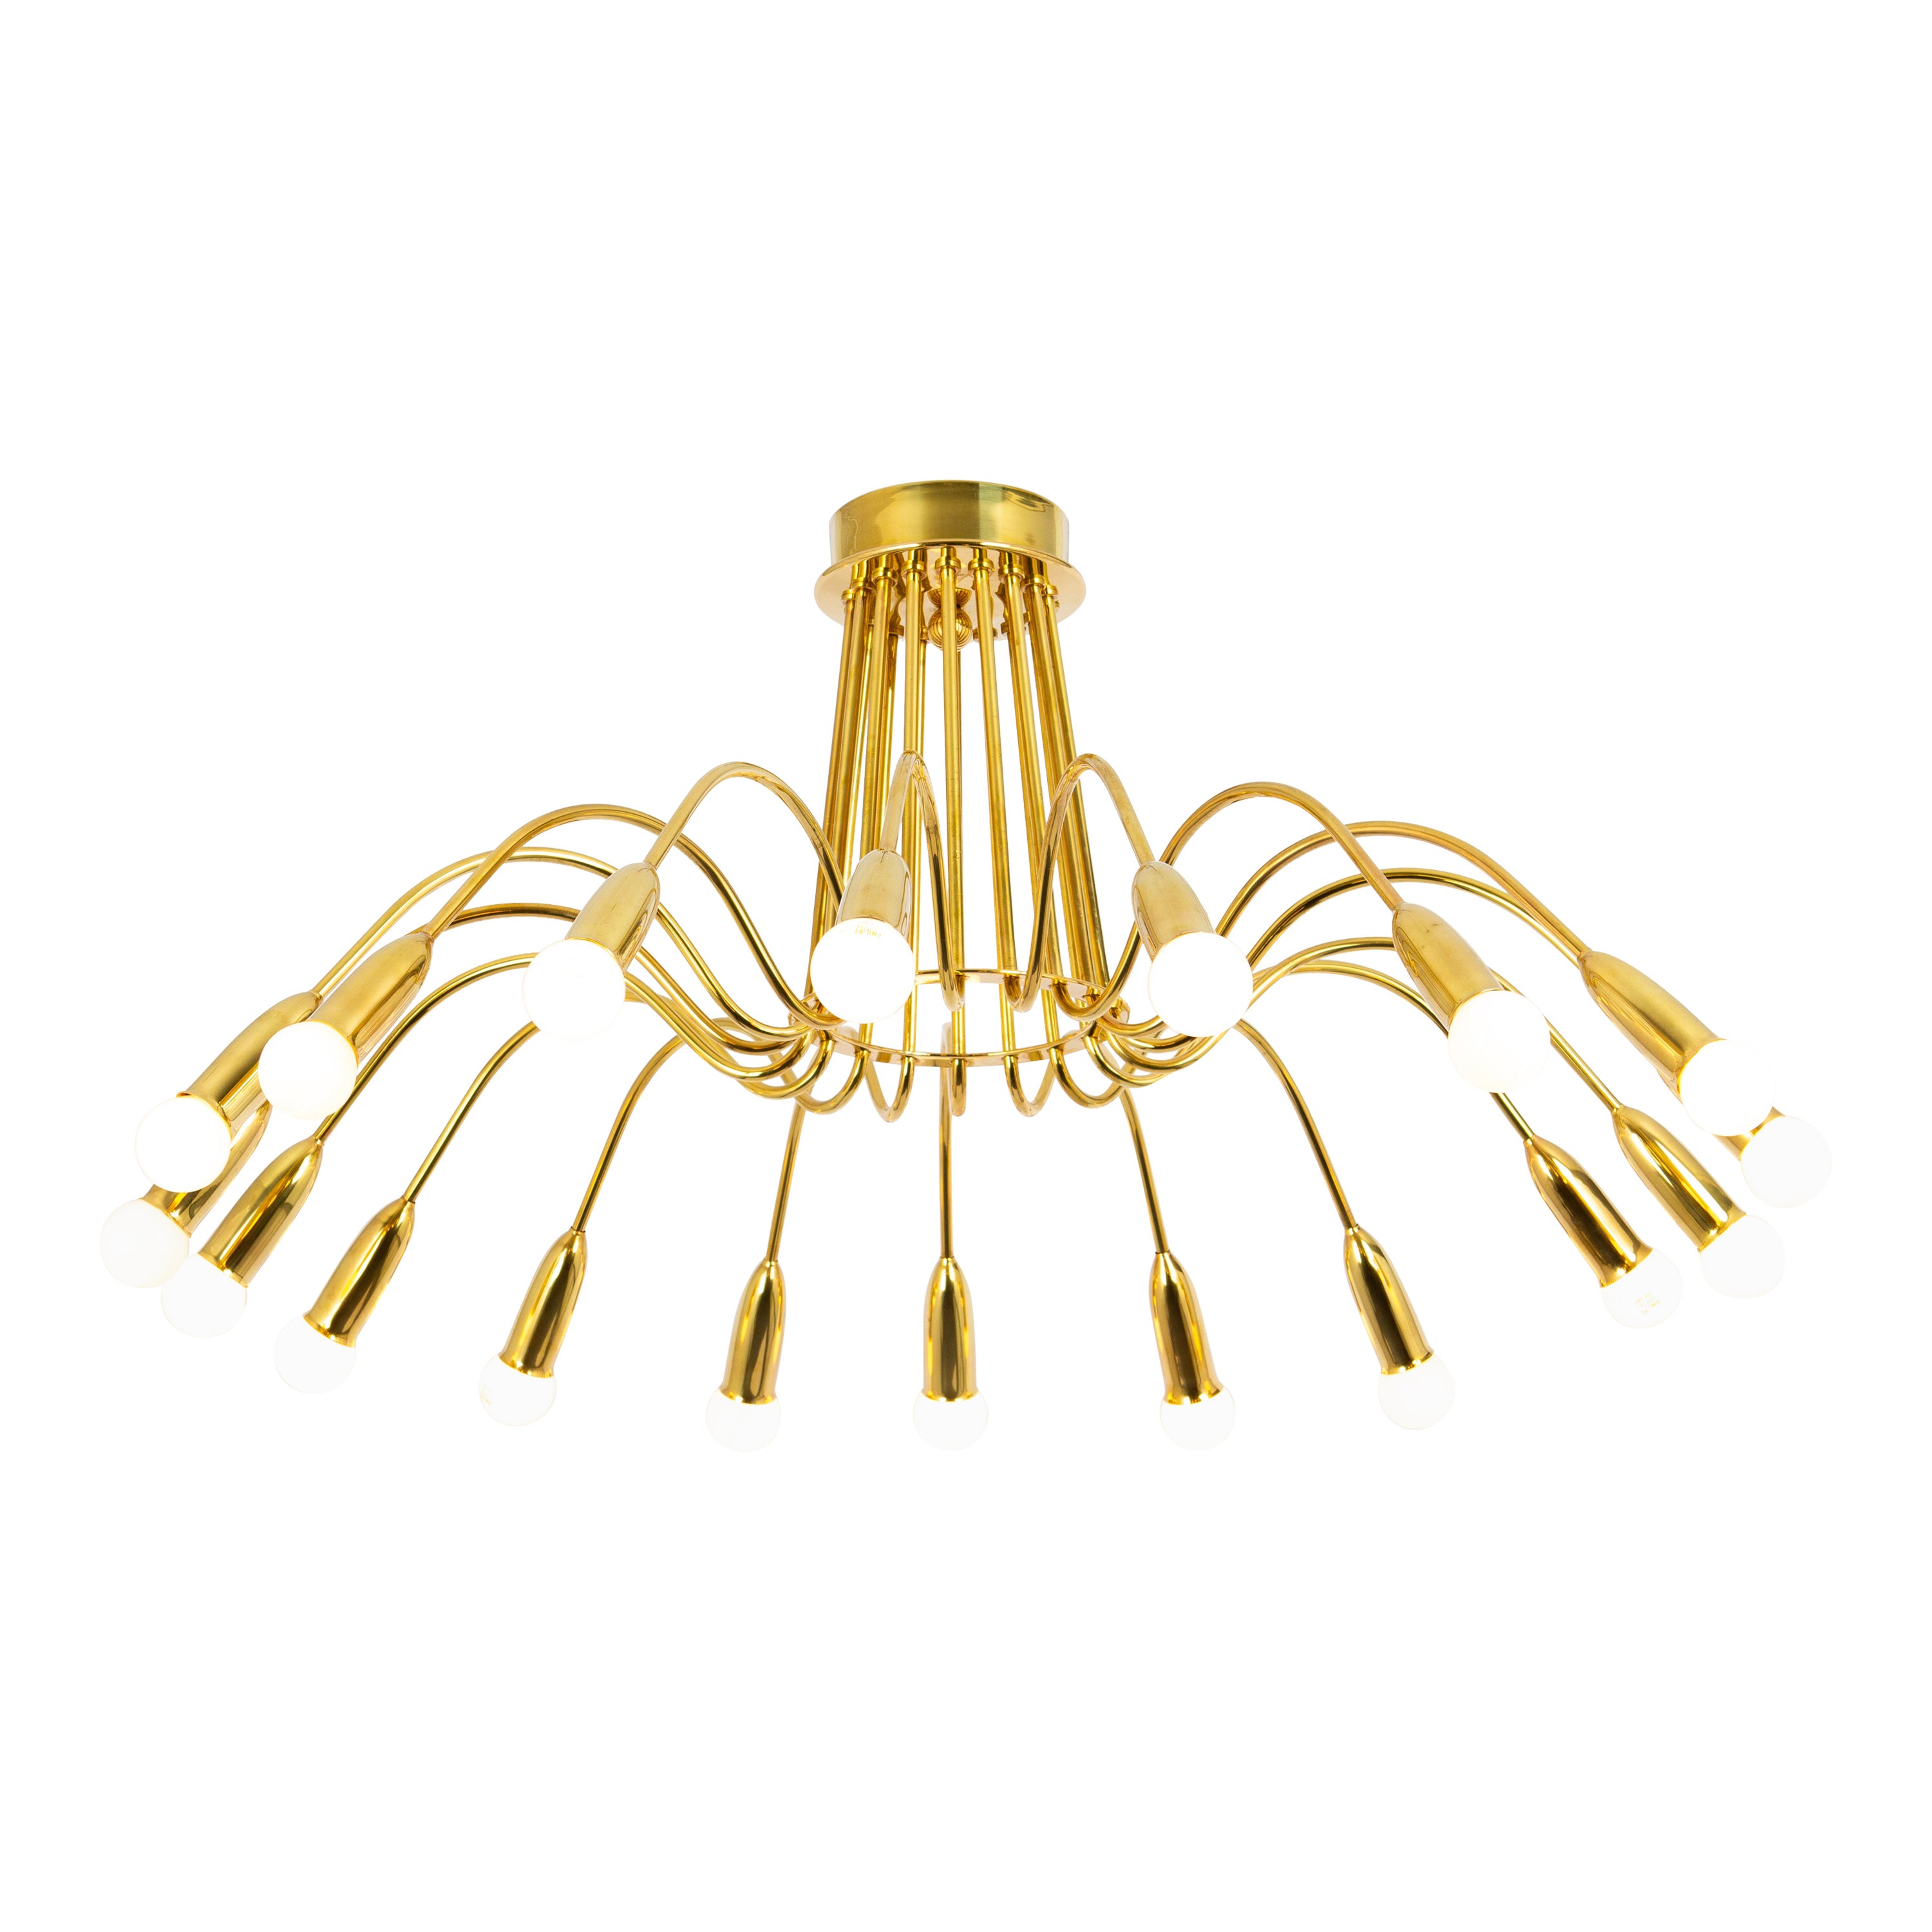 Stunning Huge Chandelier, Brass in style of Kaiser, Germany, 1960s For Sale